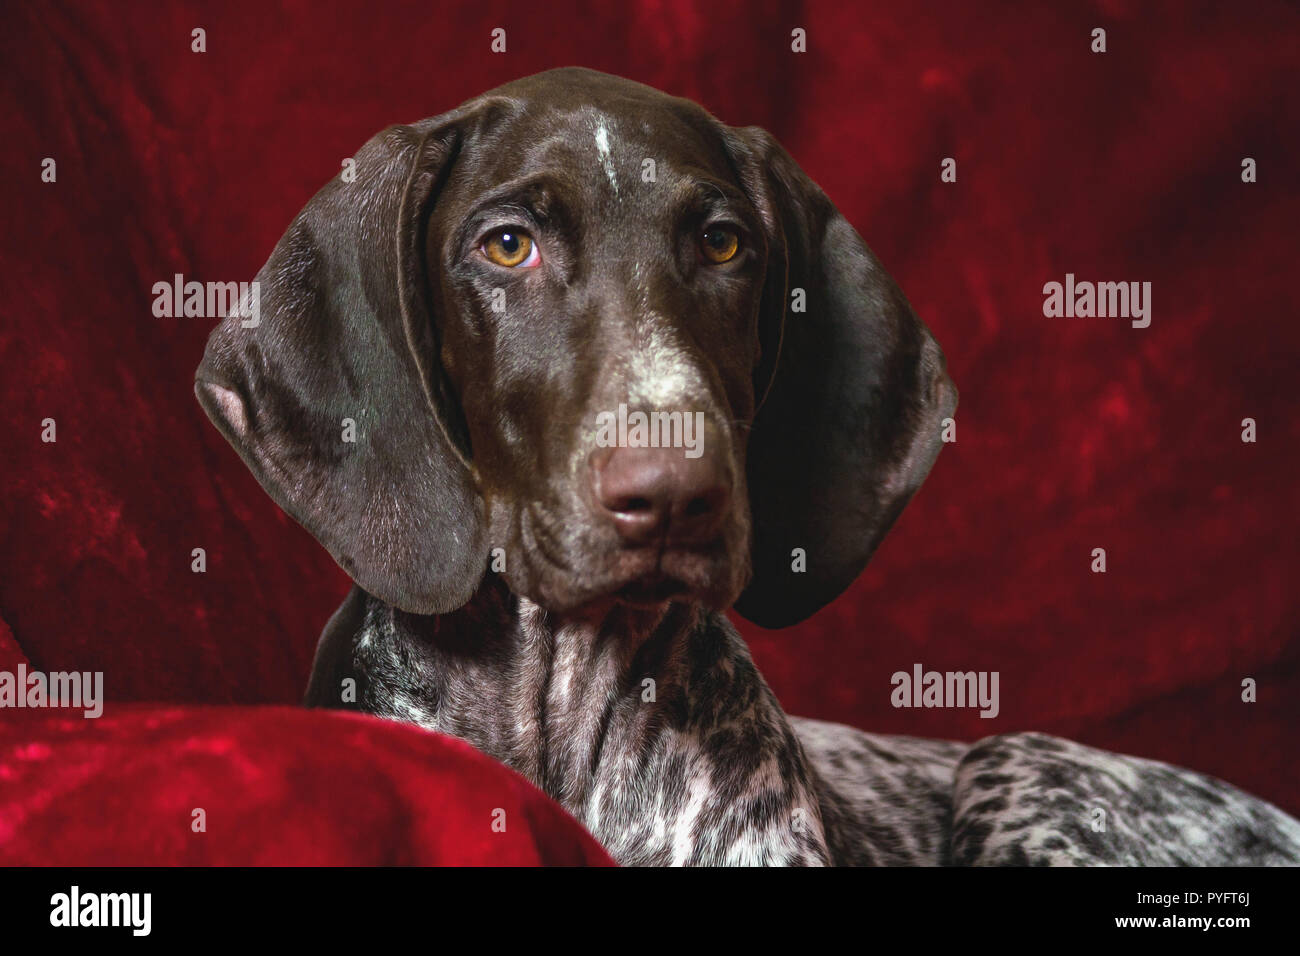 german shorthaired pointer, german kurtshaar one spotted puppy  lie on a dark red bedspread and look straight into the camera, yellow eyes, portrait, Stock Photo